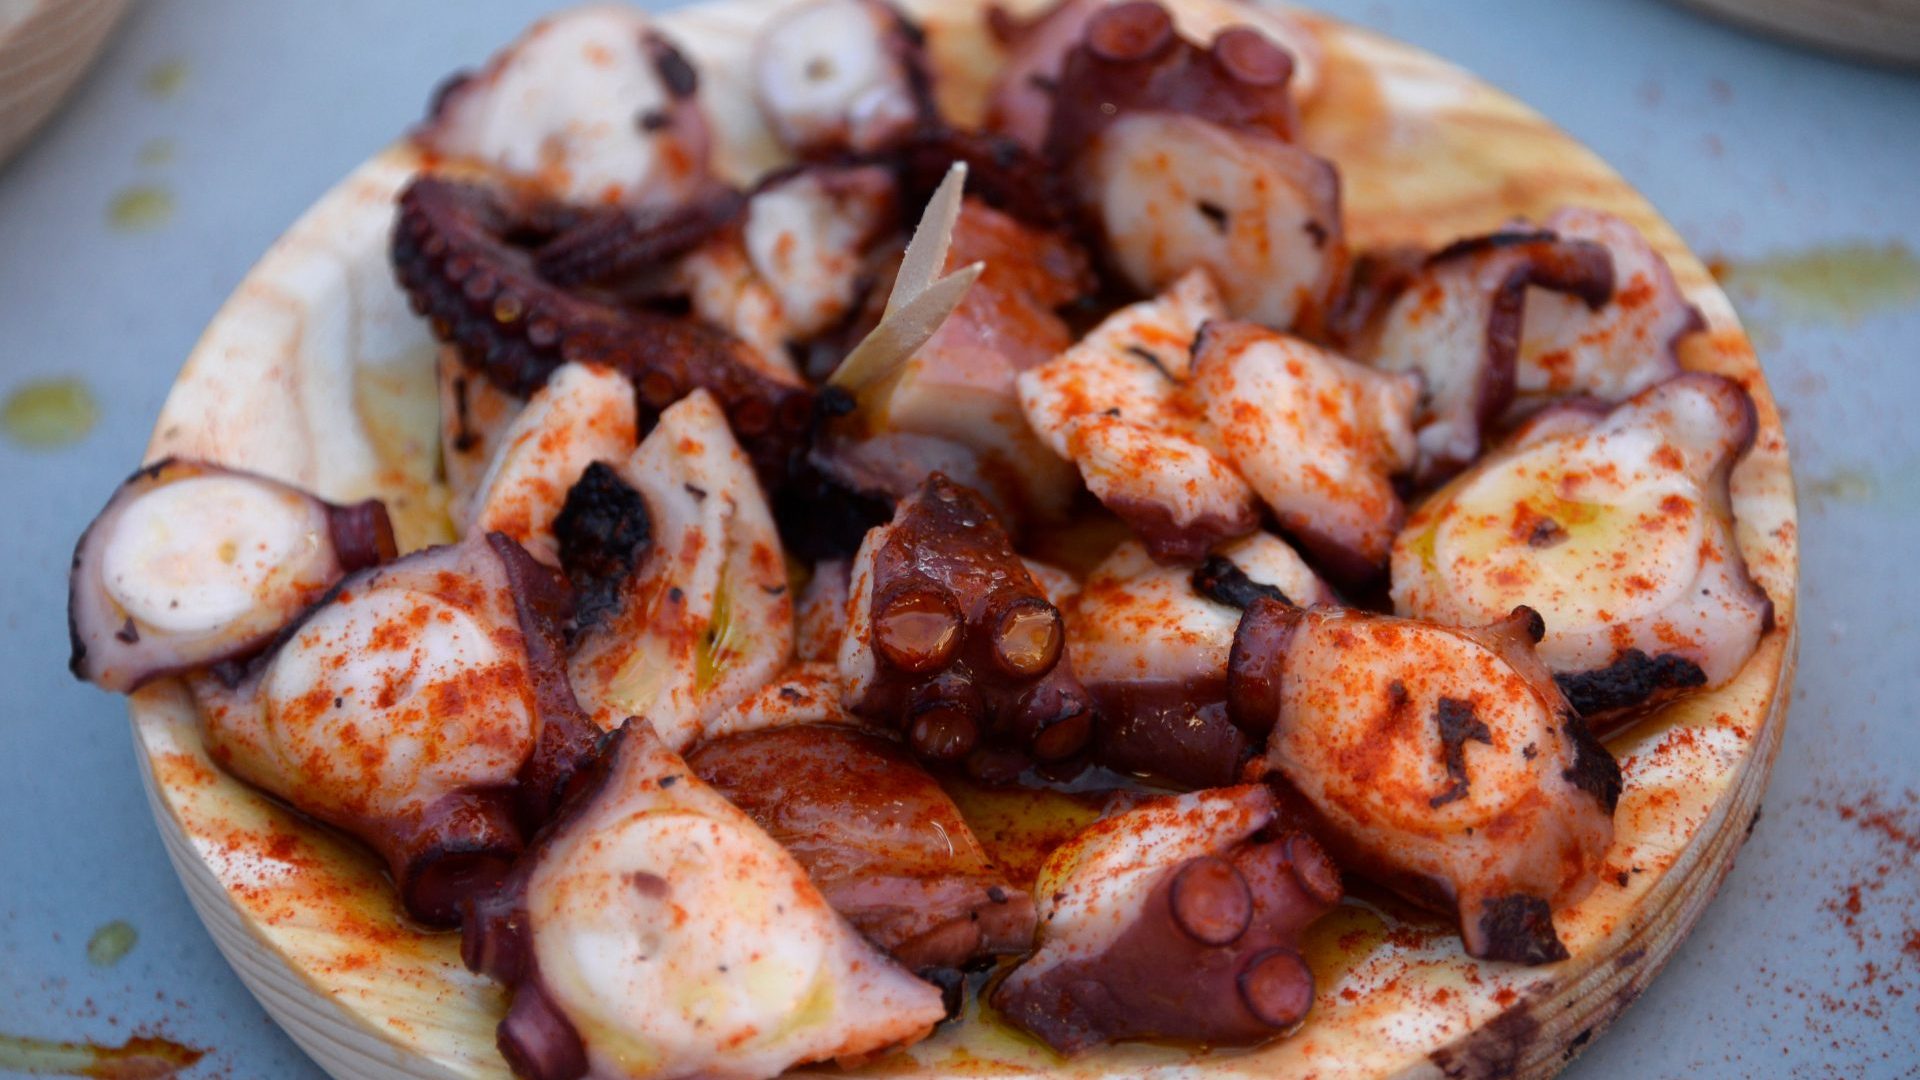 Pulpo a feira is a typical Galician dish: the octopus is boiled in copper pans, cut up into bite-sized pieces and seasoned with olive oil and paprika. Photo: Miguel Riopa/AFP/Getty